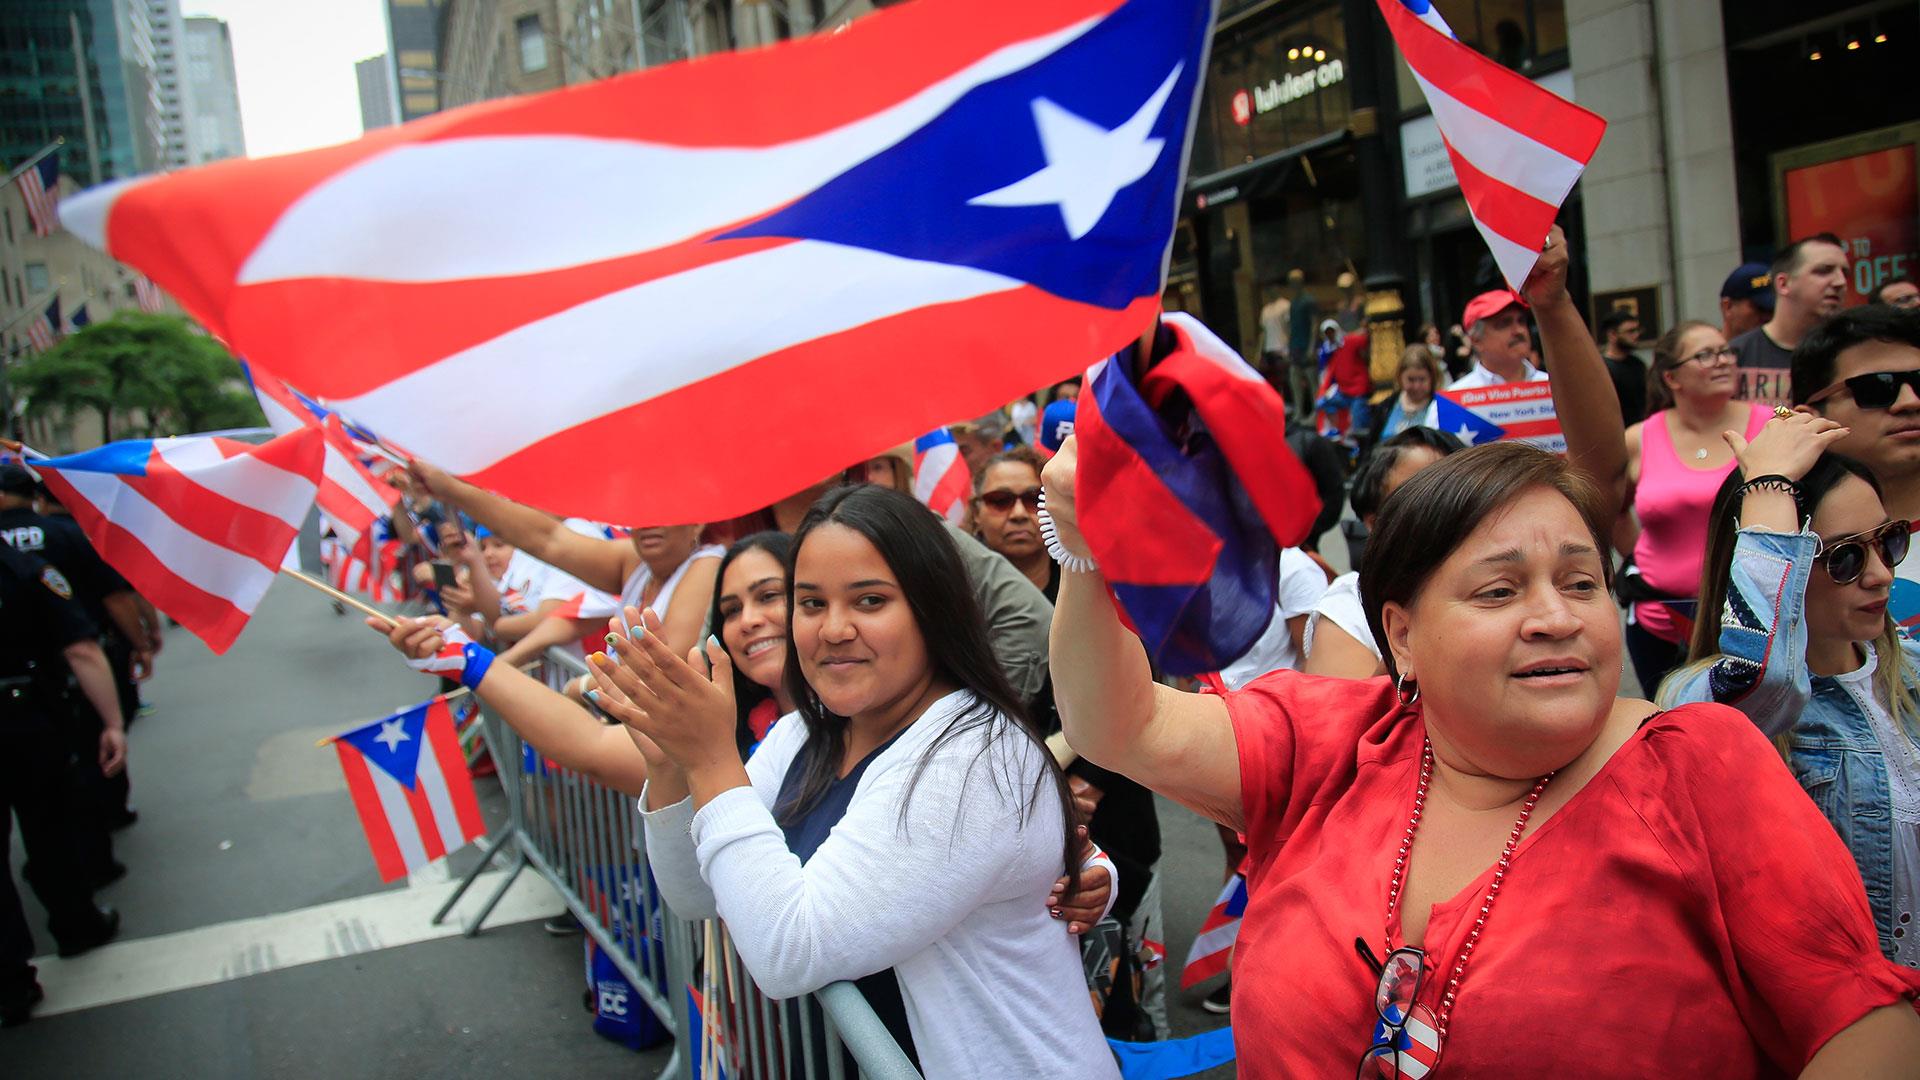 Thousands show Puerto Rican pride in first parade since Hurricane Maria.